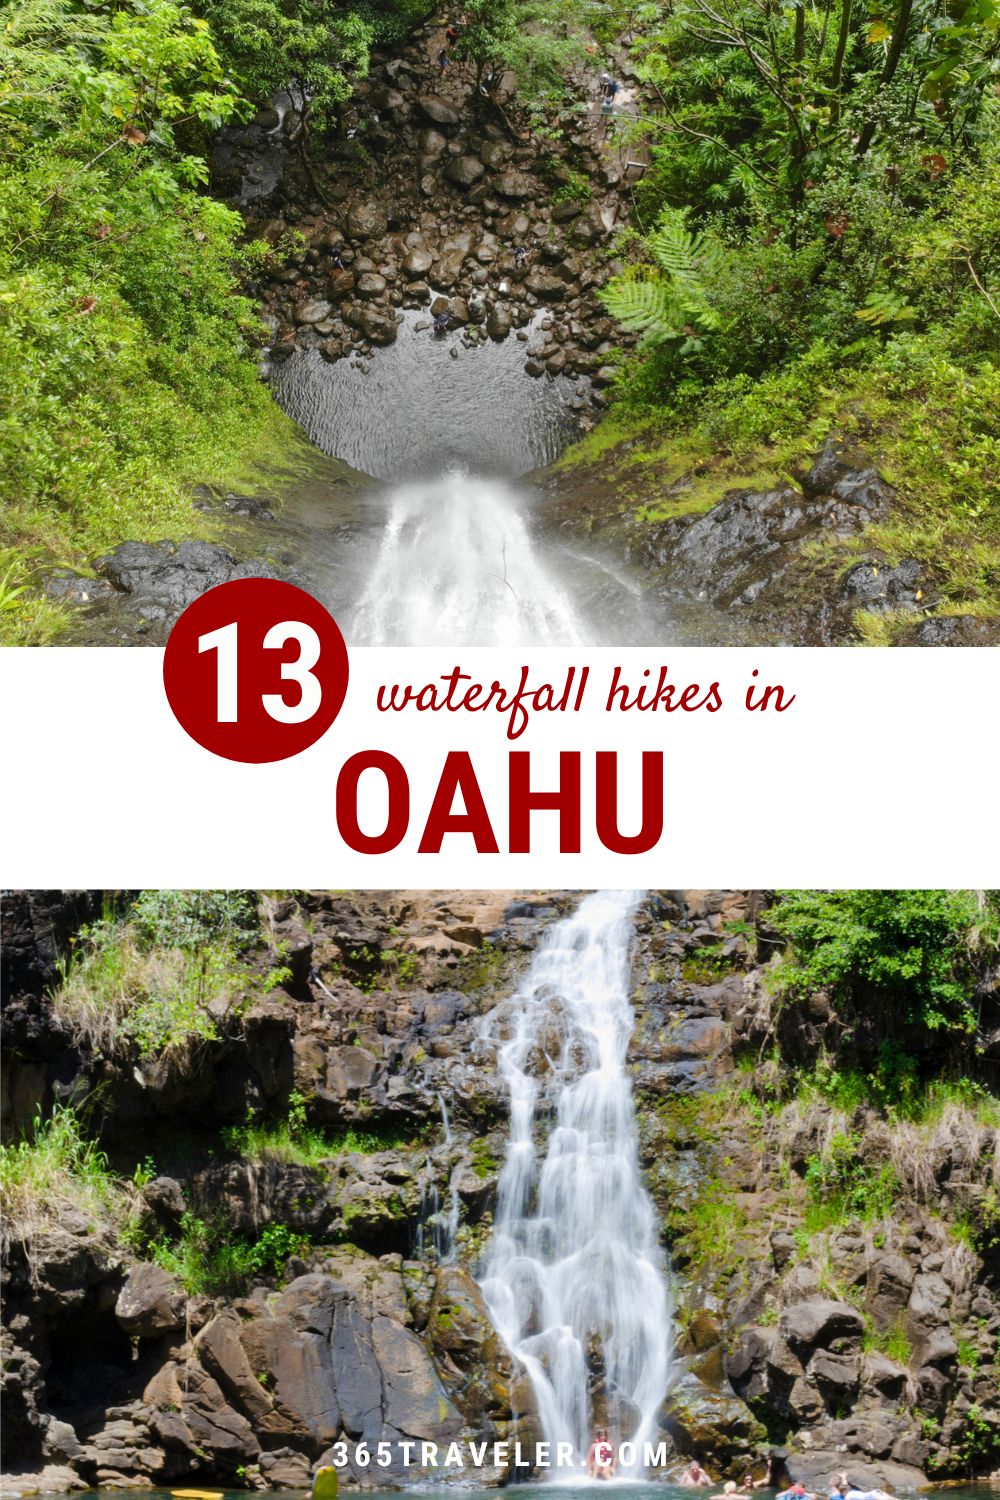 13 SPECTACULAR WATERFALL HIKES OAHU HAS TO OFFER